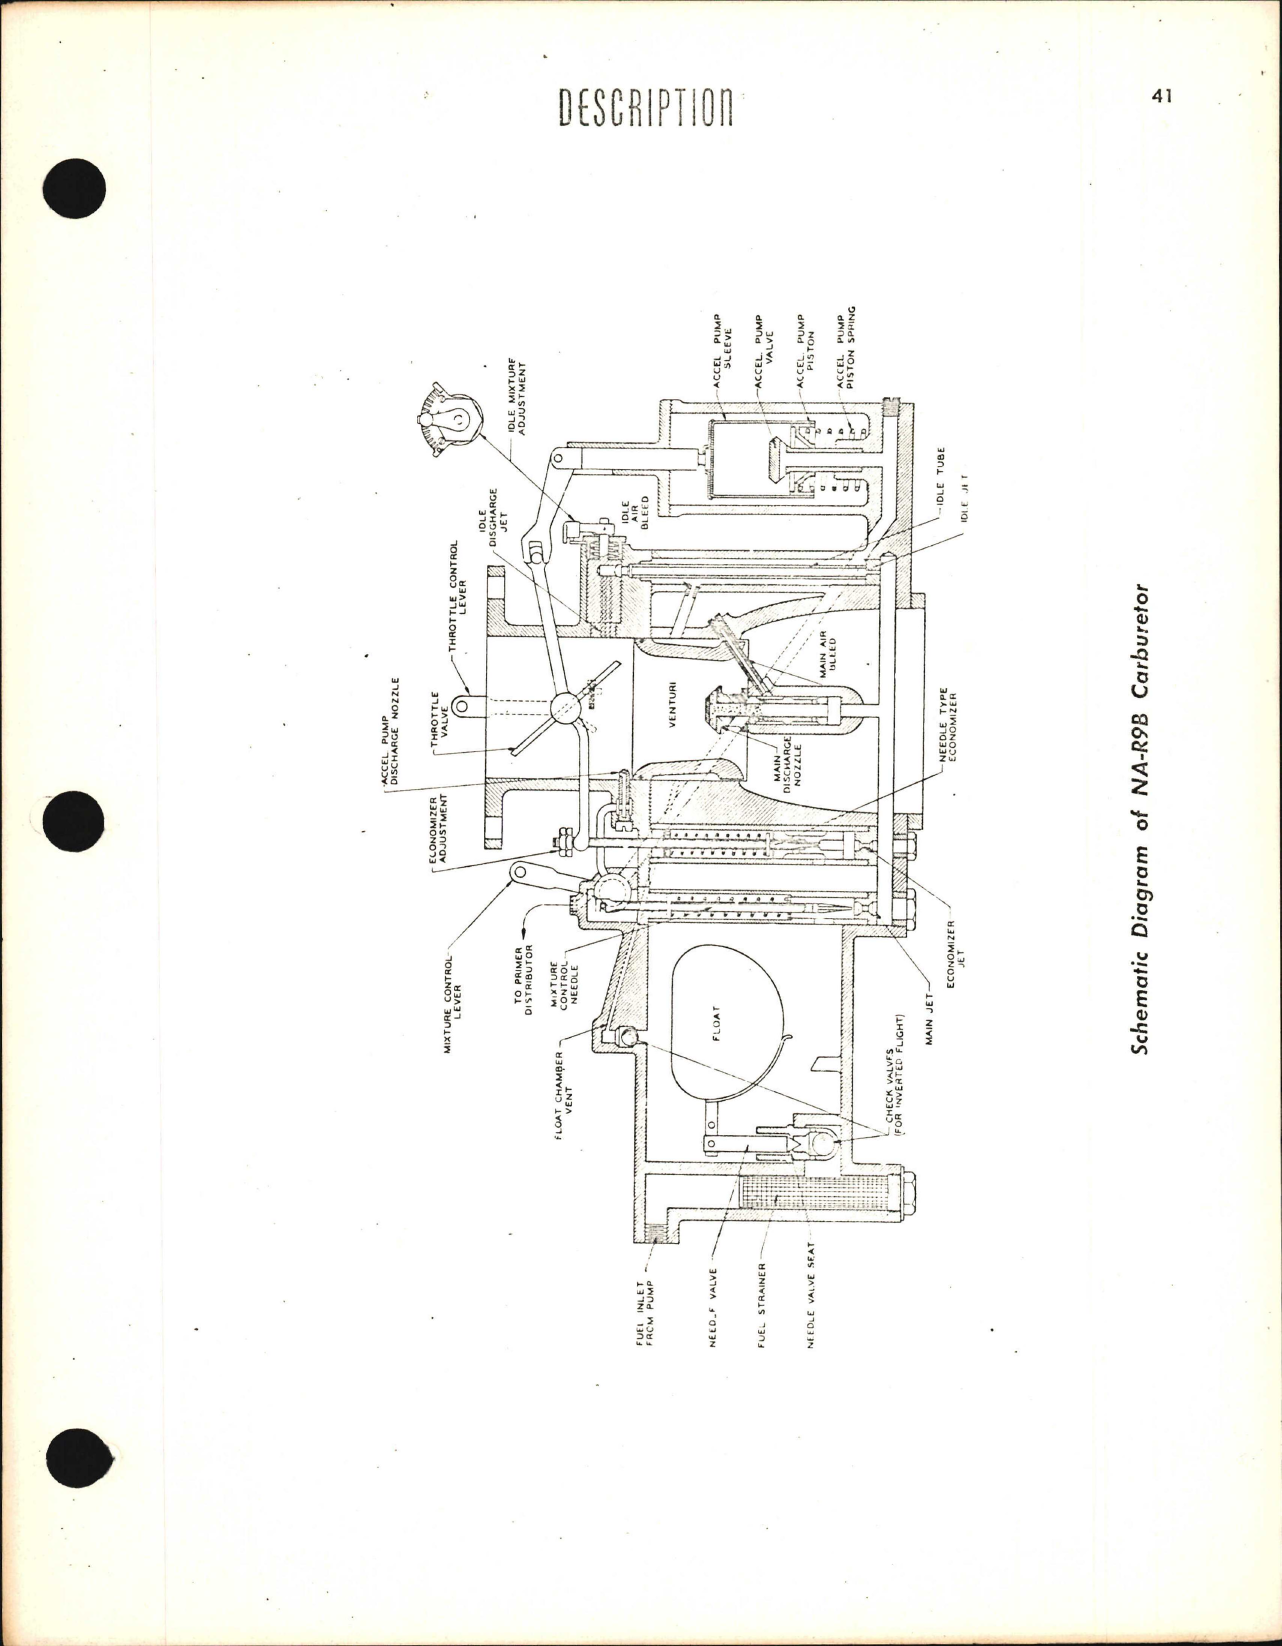 Sample page 5 from AirCorps Library document: Maintenance & Service for R-985 and R-1340 Engines